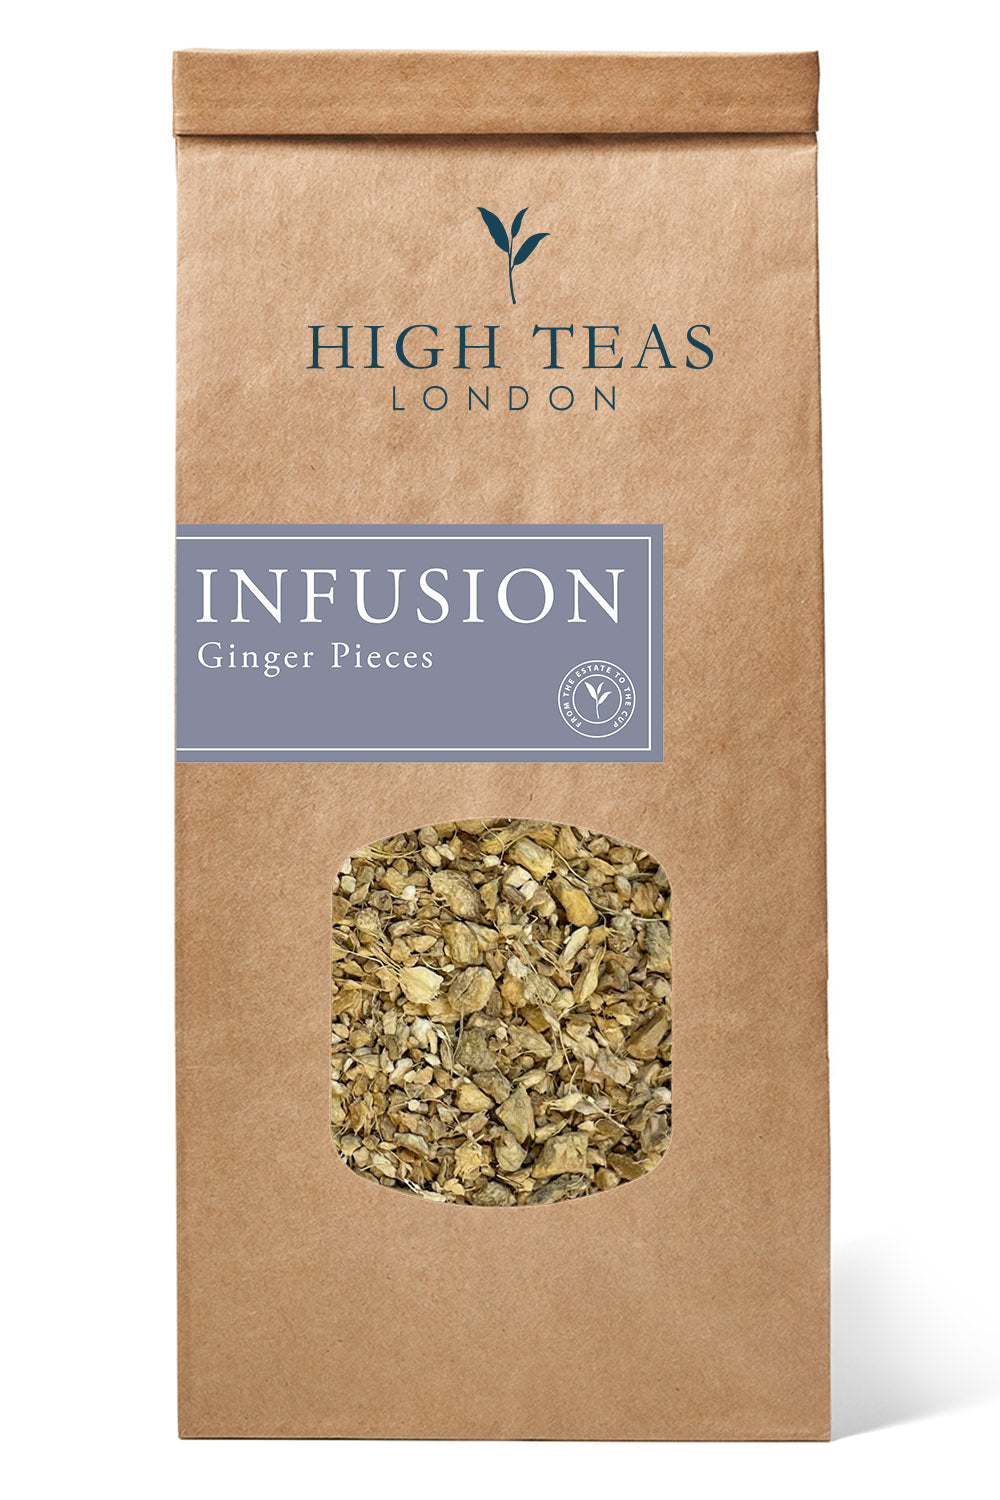 Ginger Pieces Infusion-250g-Loose Leaf Tea-High Teas